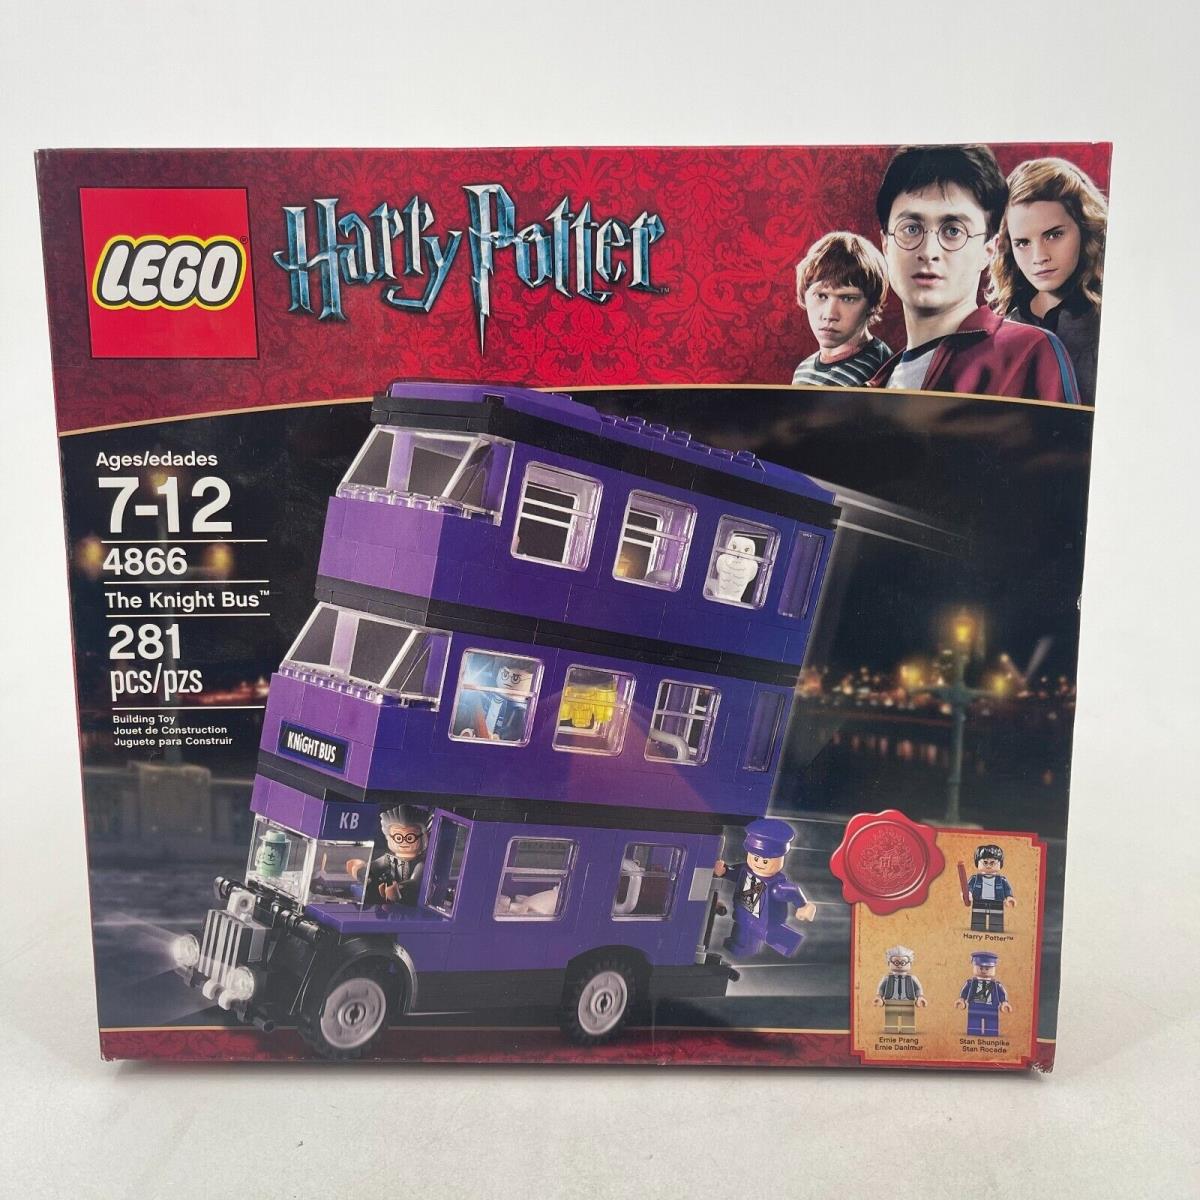 Lego Harry Potter 4866 The Knight Bus 281 Pieces Ages 7-12